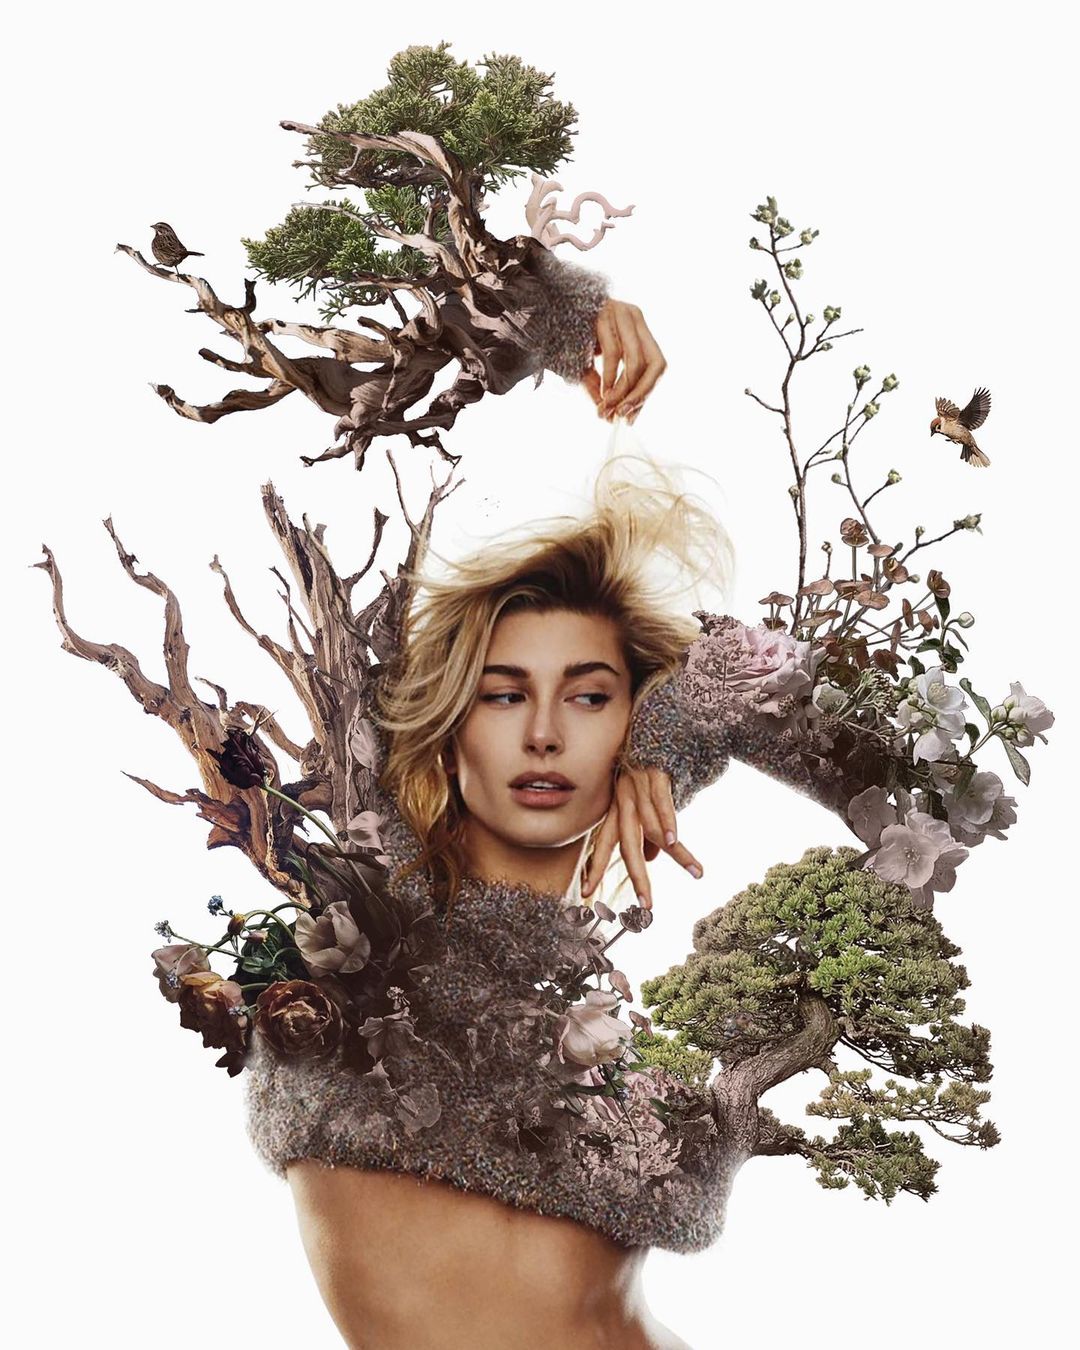 Nature Blooms From the Human Body in the Digital Collages of Charles Bentley Hailey Bieber